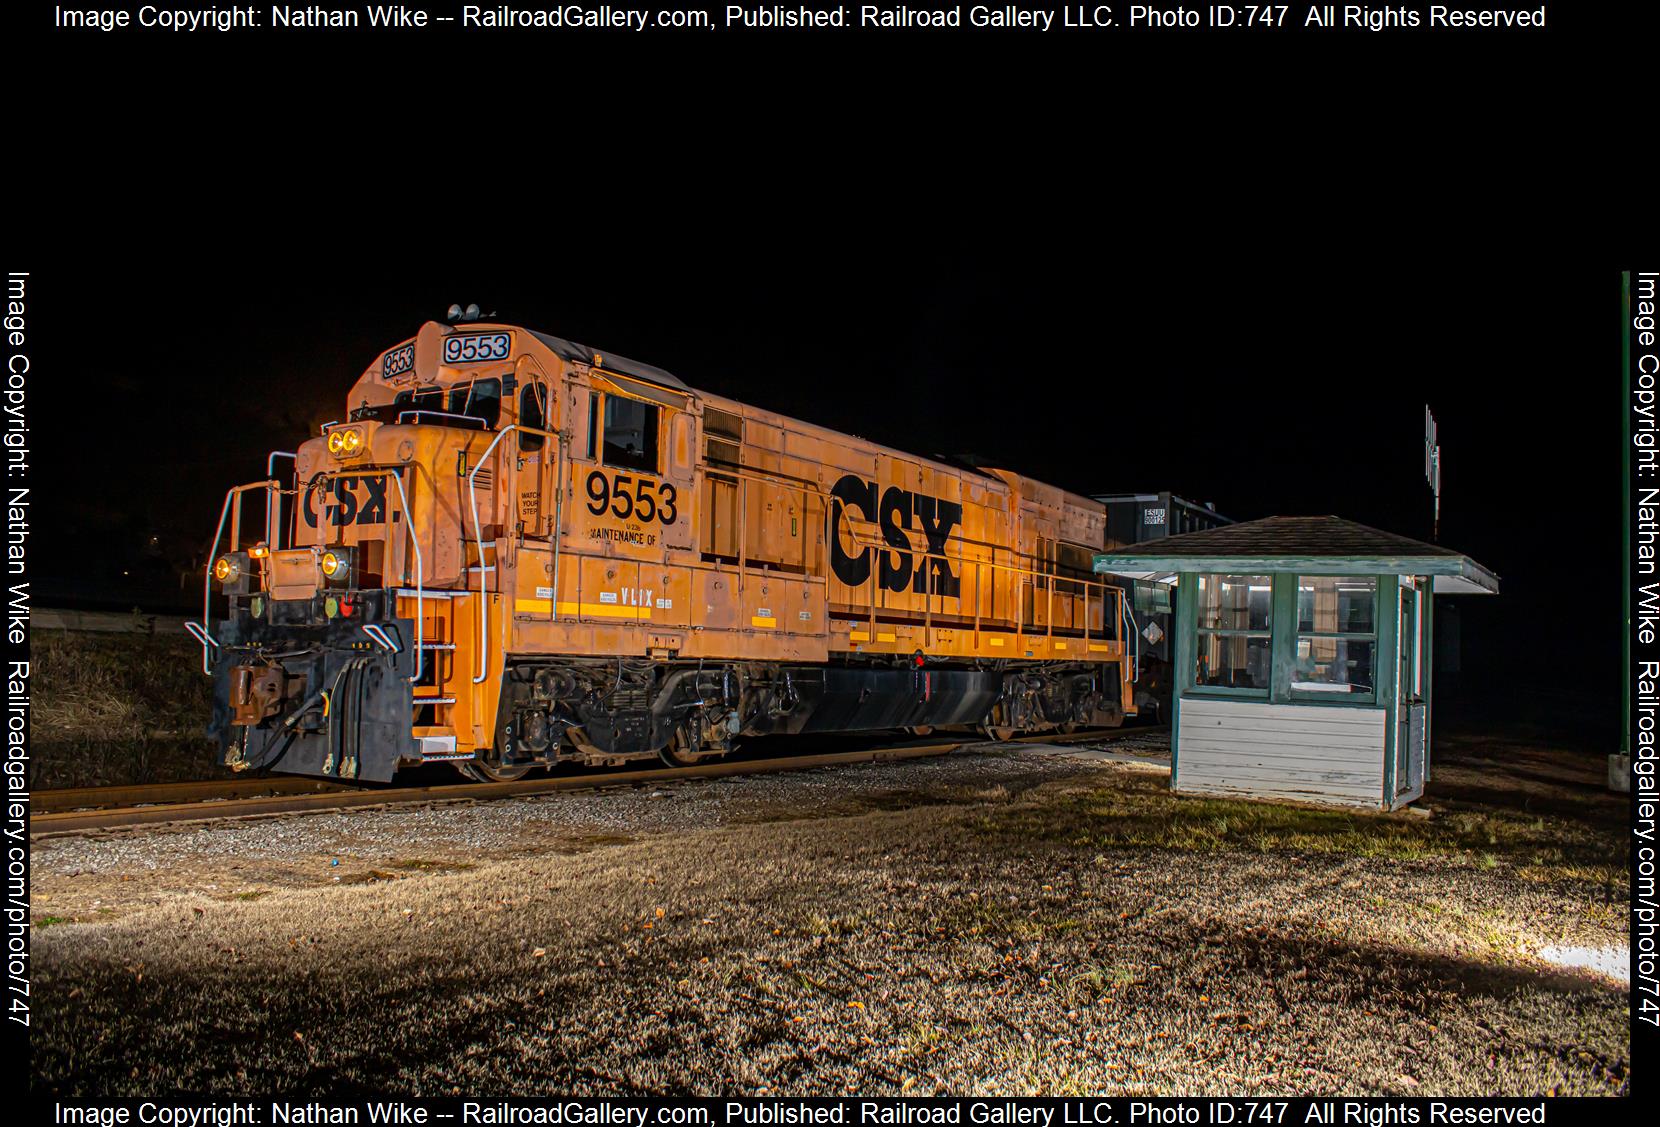 CSXT 9553 is a class U23B and  is pictured in Oak Ridge, Tennessee, United States.  This was taken along the Heritage Railroad on the Heritage Railroad. Photo Copyright: Nathan Wike uploaded to Railroad Gallery on 02/24/2023. This photograph of CSXT 9553 was taken on Friday, January 06, 2023. All Rights Reserved. 